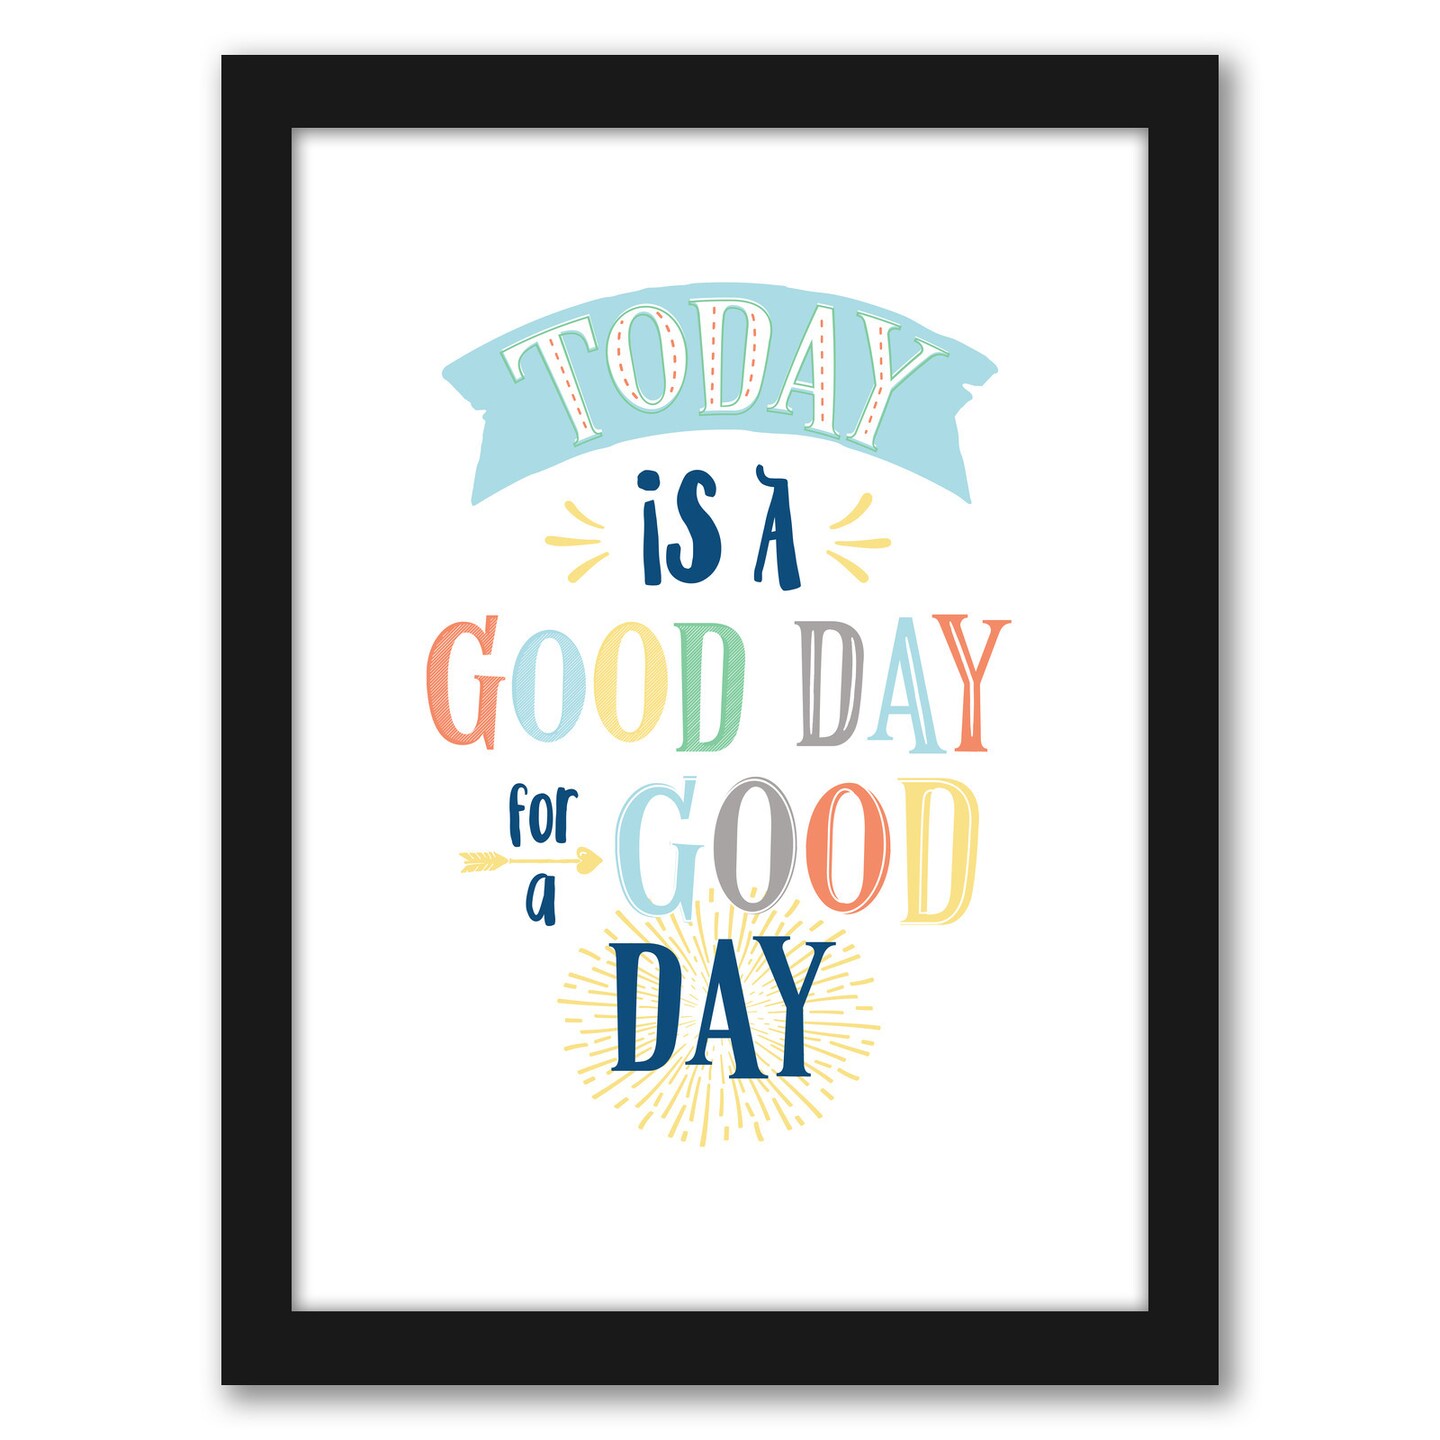 Today Is A Good Day by Elena David Frame  - Americanflat